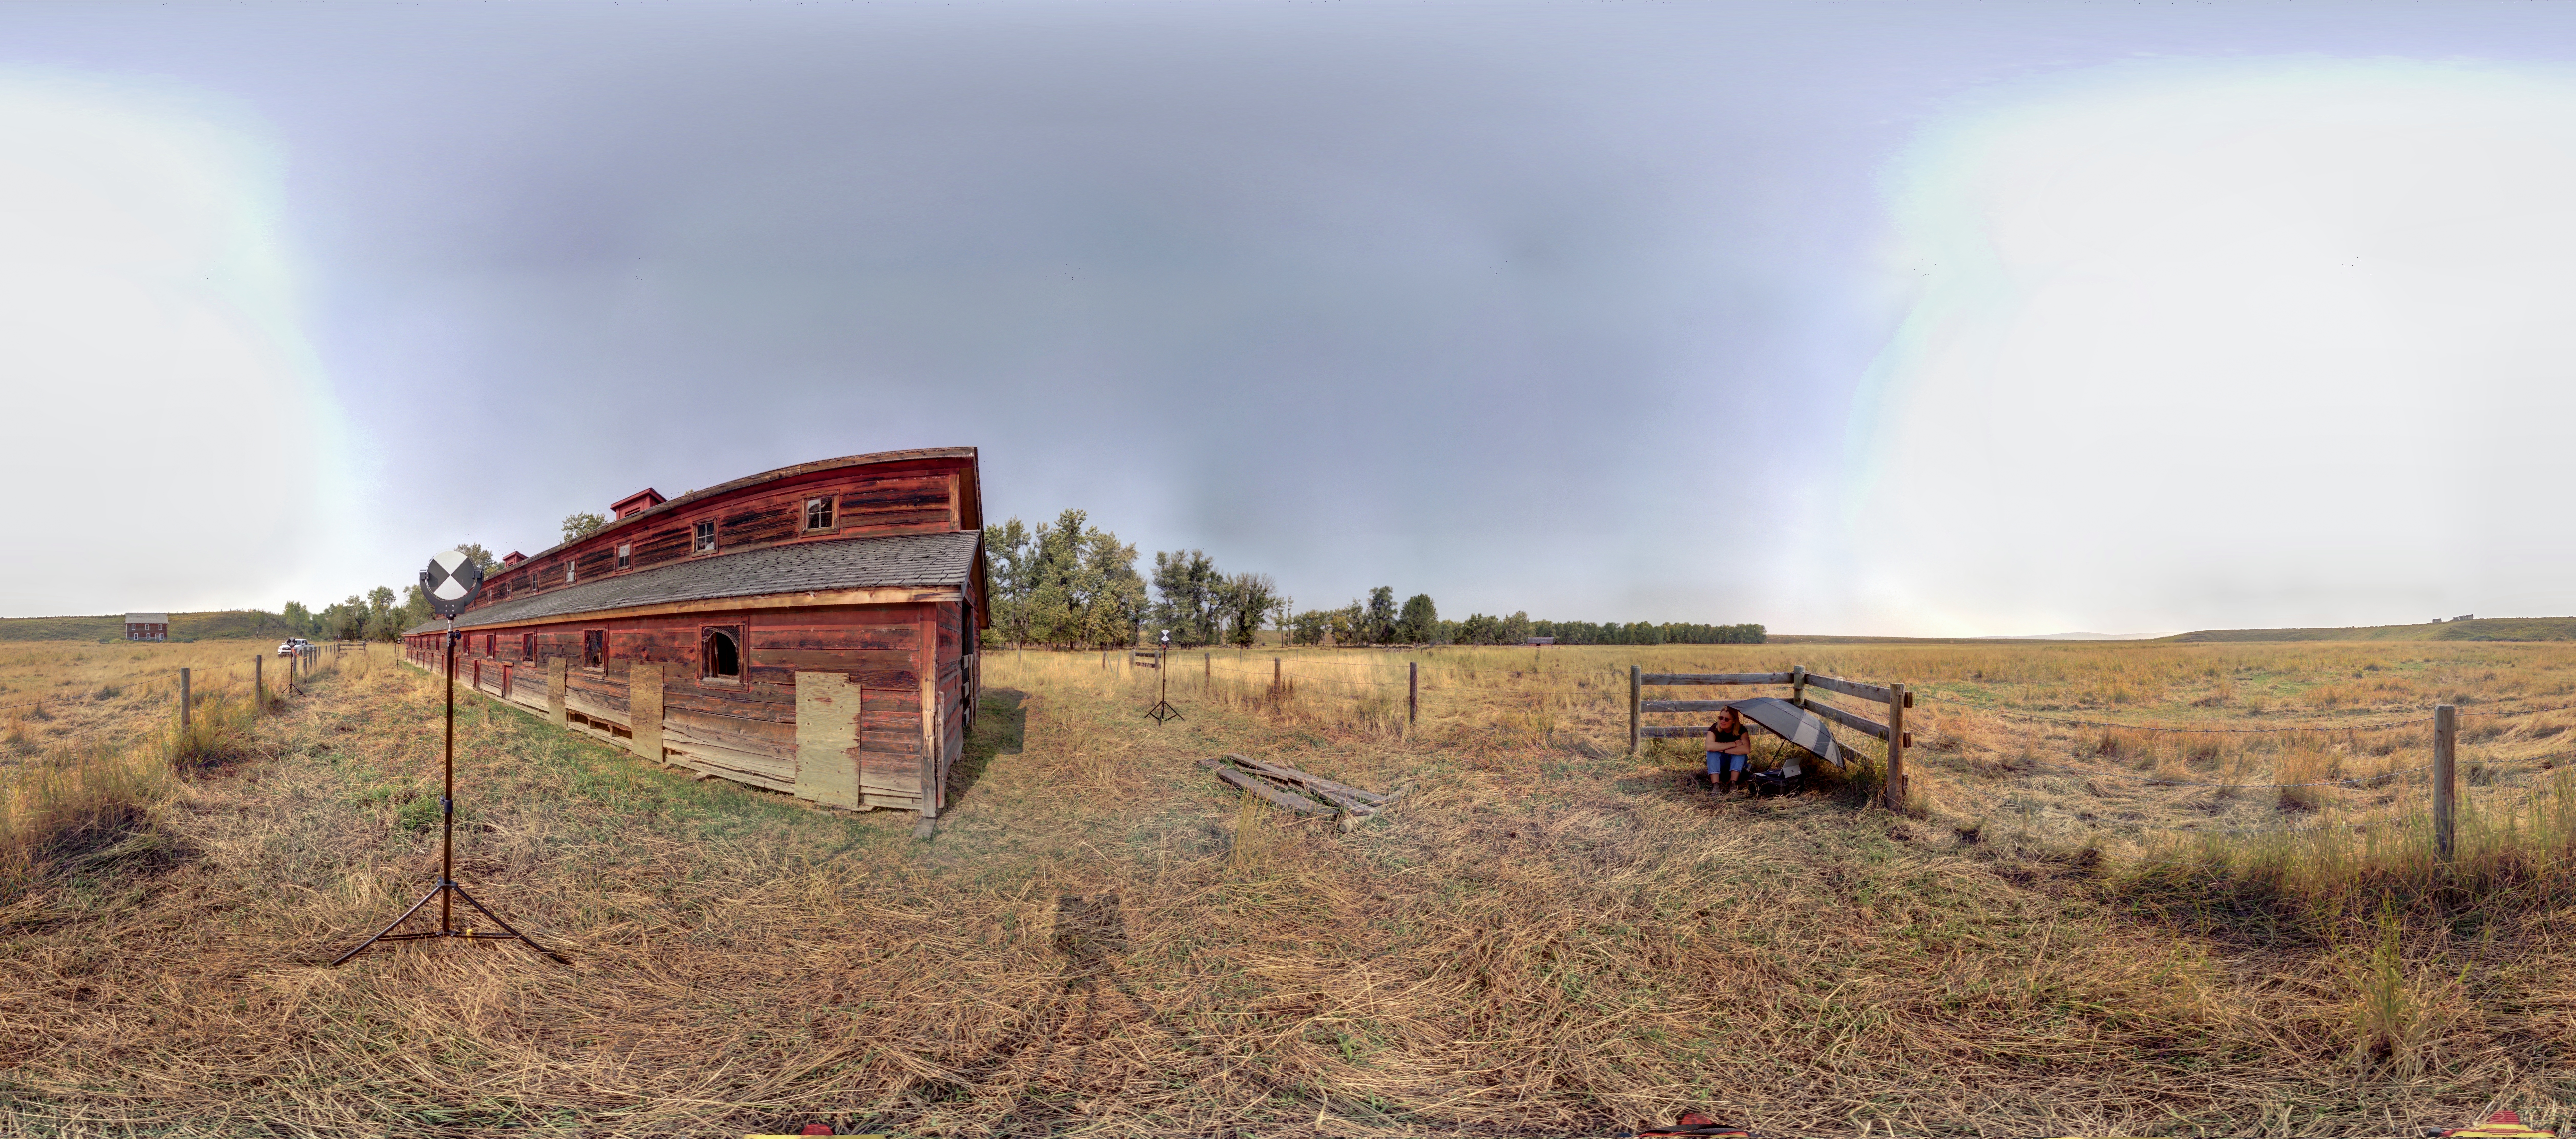 Panoramic image from scan location 12 of the exterior of the Piggery at Bar U Ranch